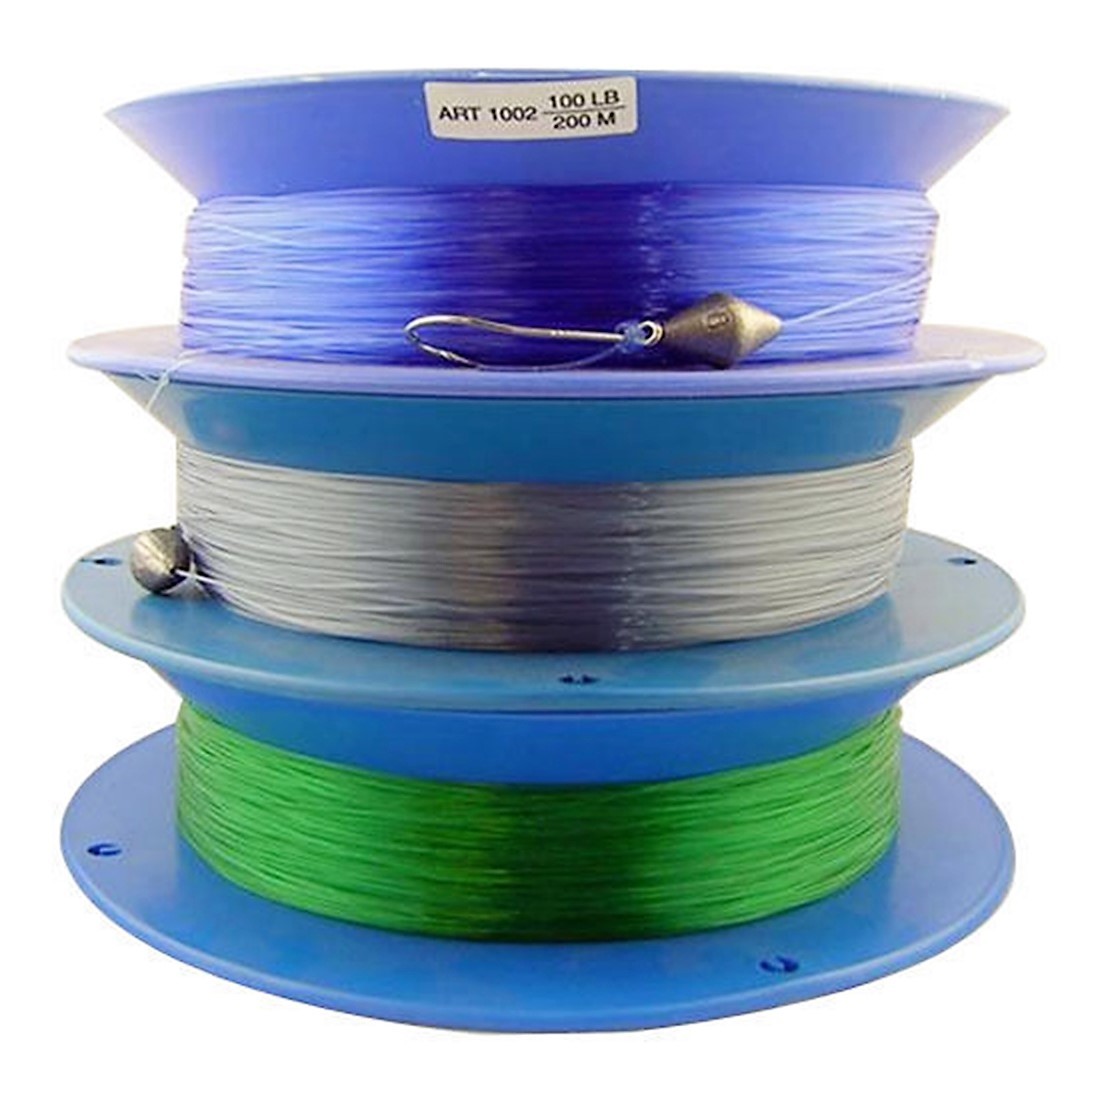 100lb PRE RIGGED 10 RING CASTER HAND LINE-200m BULK 3 PACK HEAVY DUTY  OFFSHORE